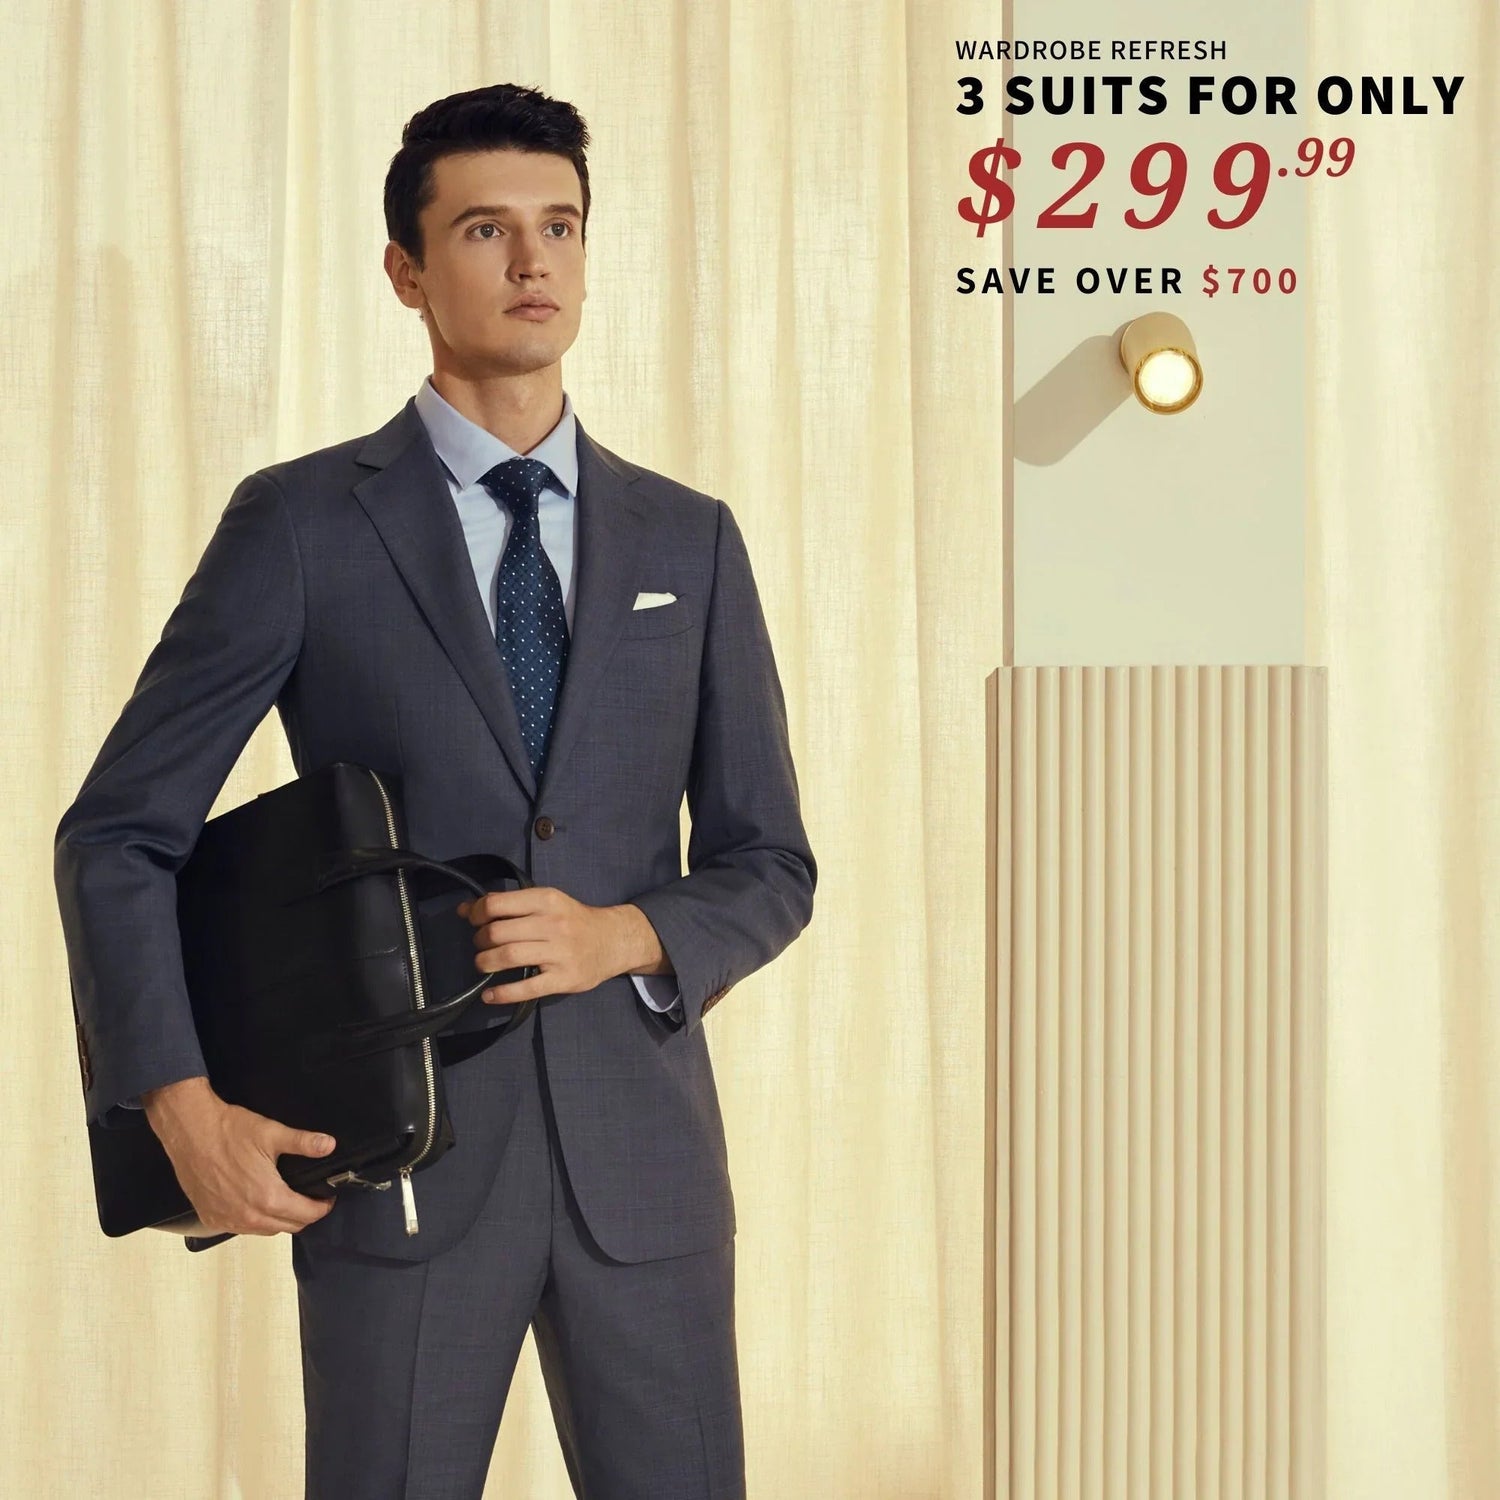 A man in a suit is holding a briefcase, showcasing his impeccable attire featuring the BYOB 3 Suits for $299 bundle.